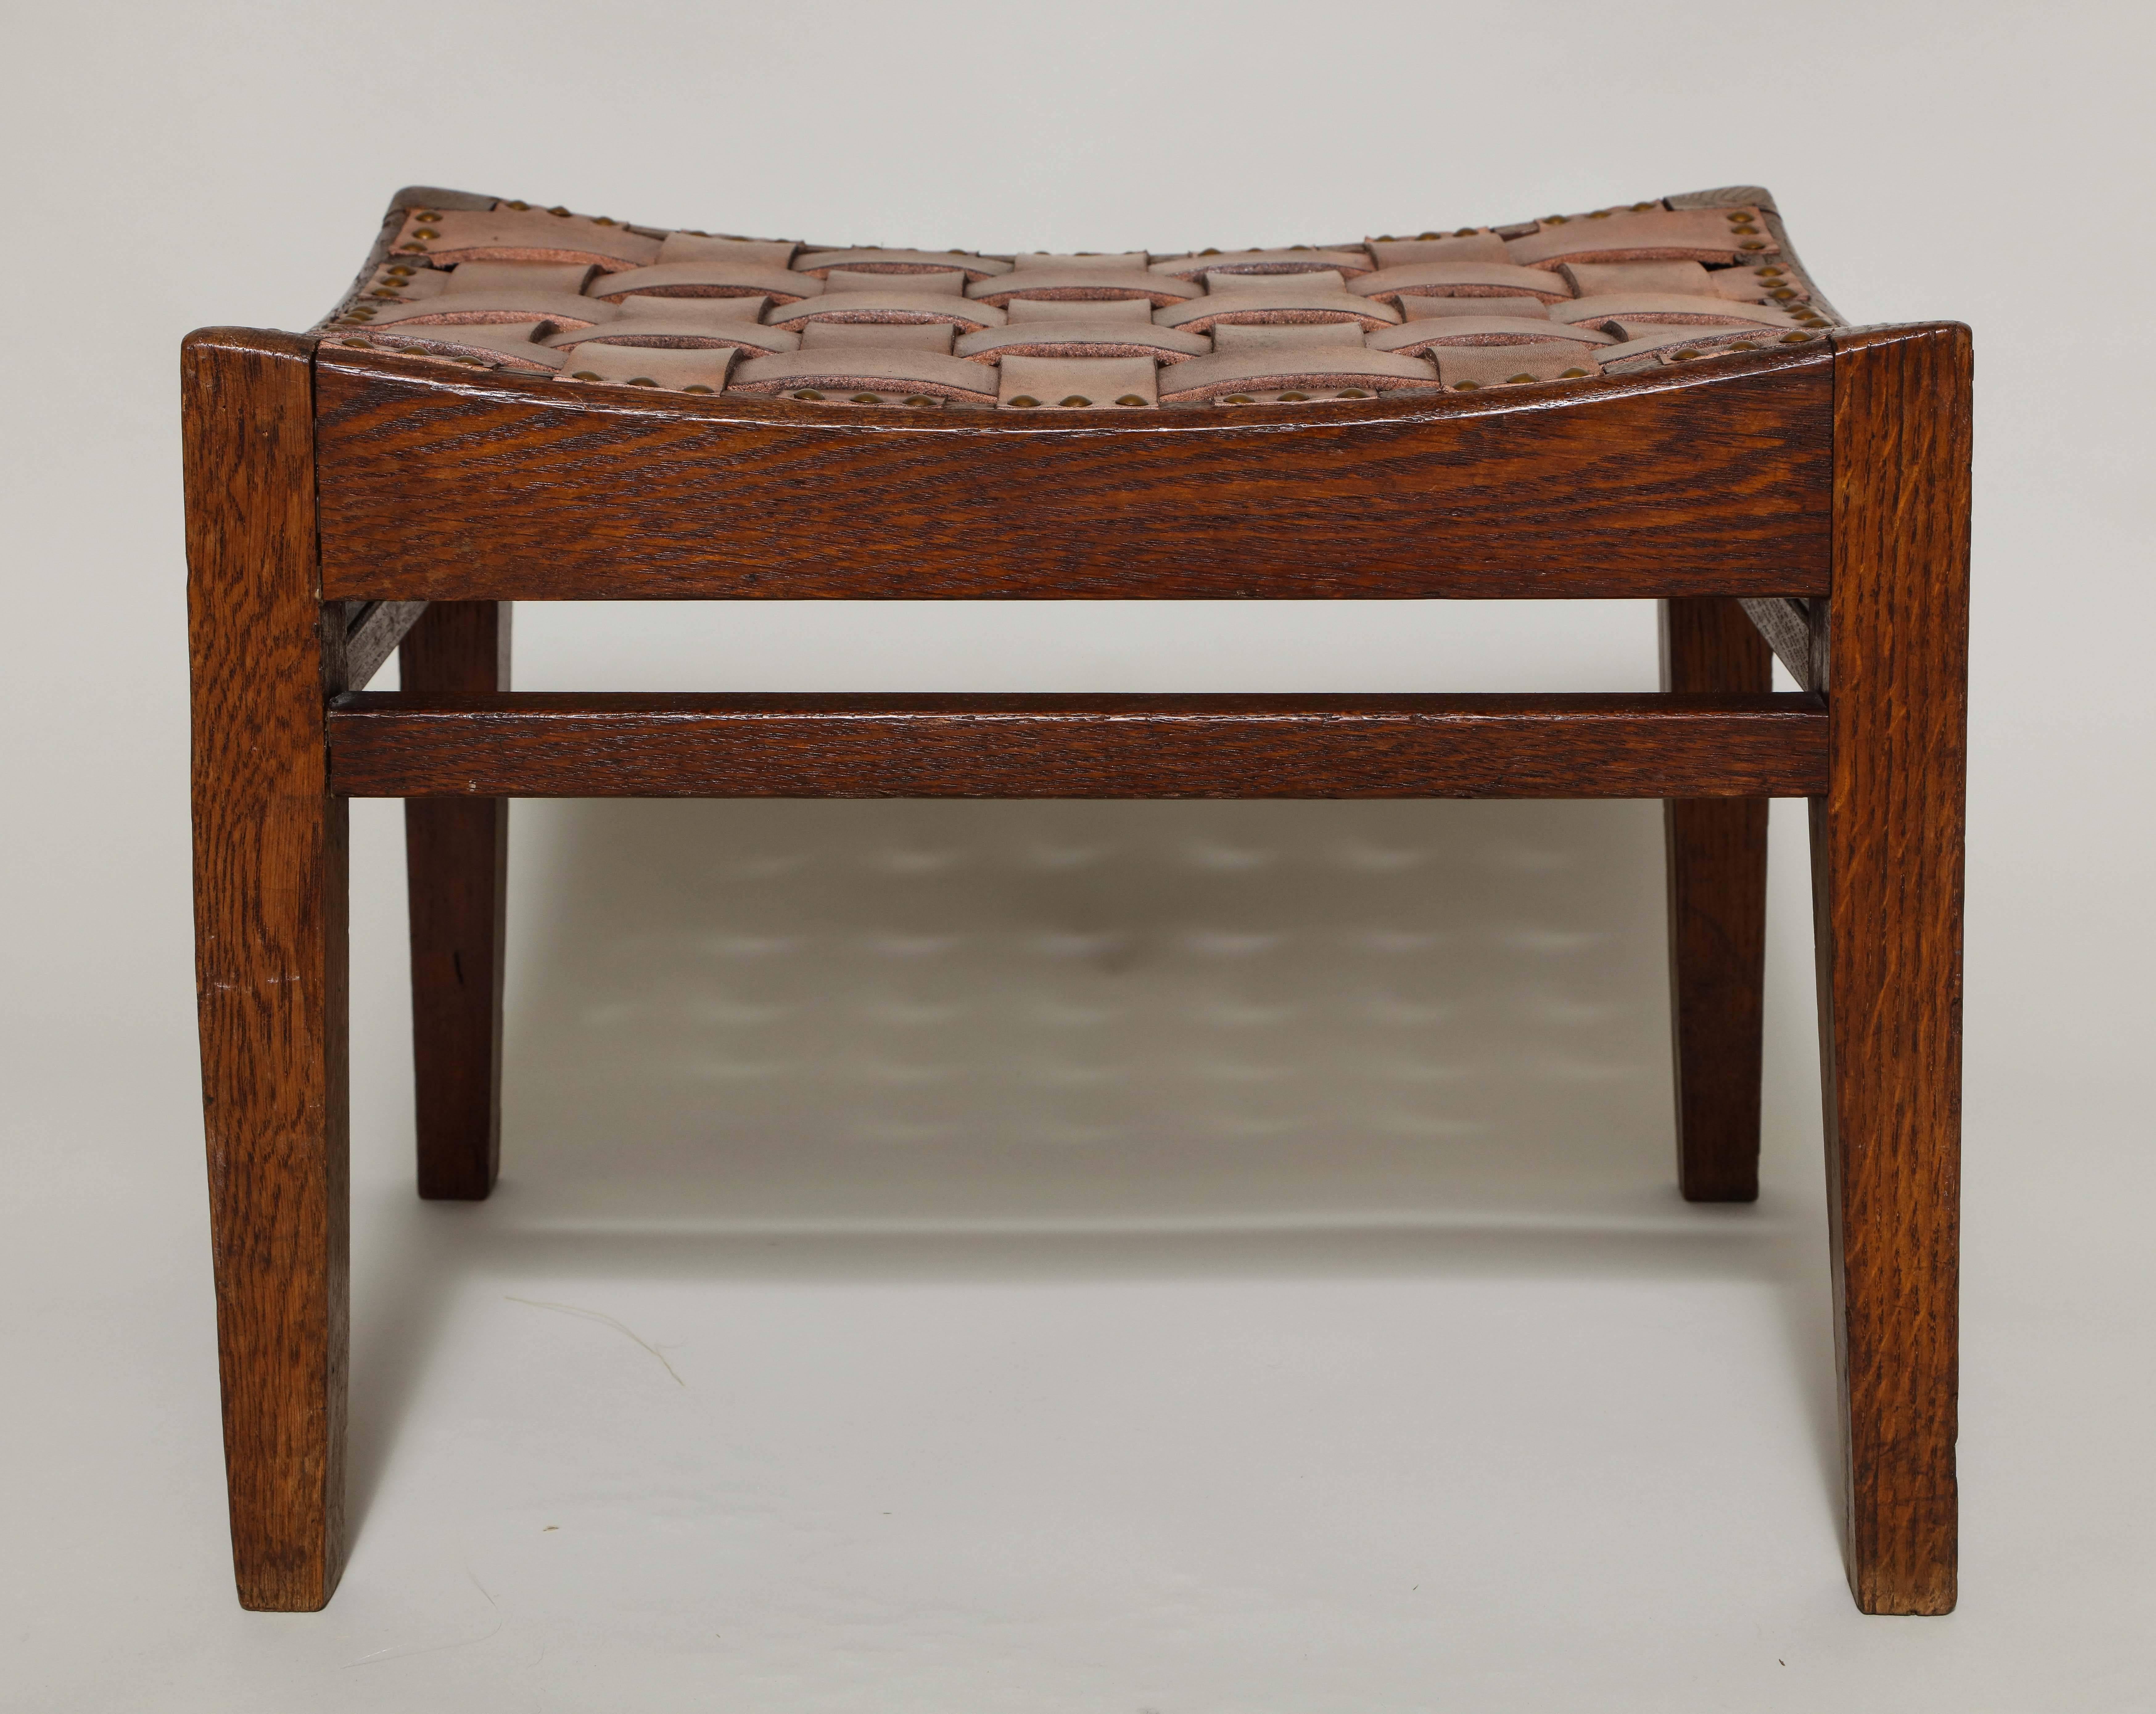 Good English Arts & Crafts period stool by Arthur Simpson of Kendal, having woven leather strap work with studs, on dished seat rails, the four legs joined by high box stretcher.